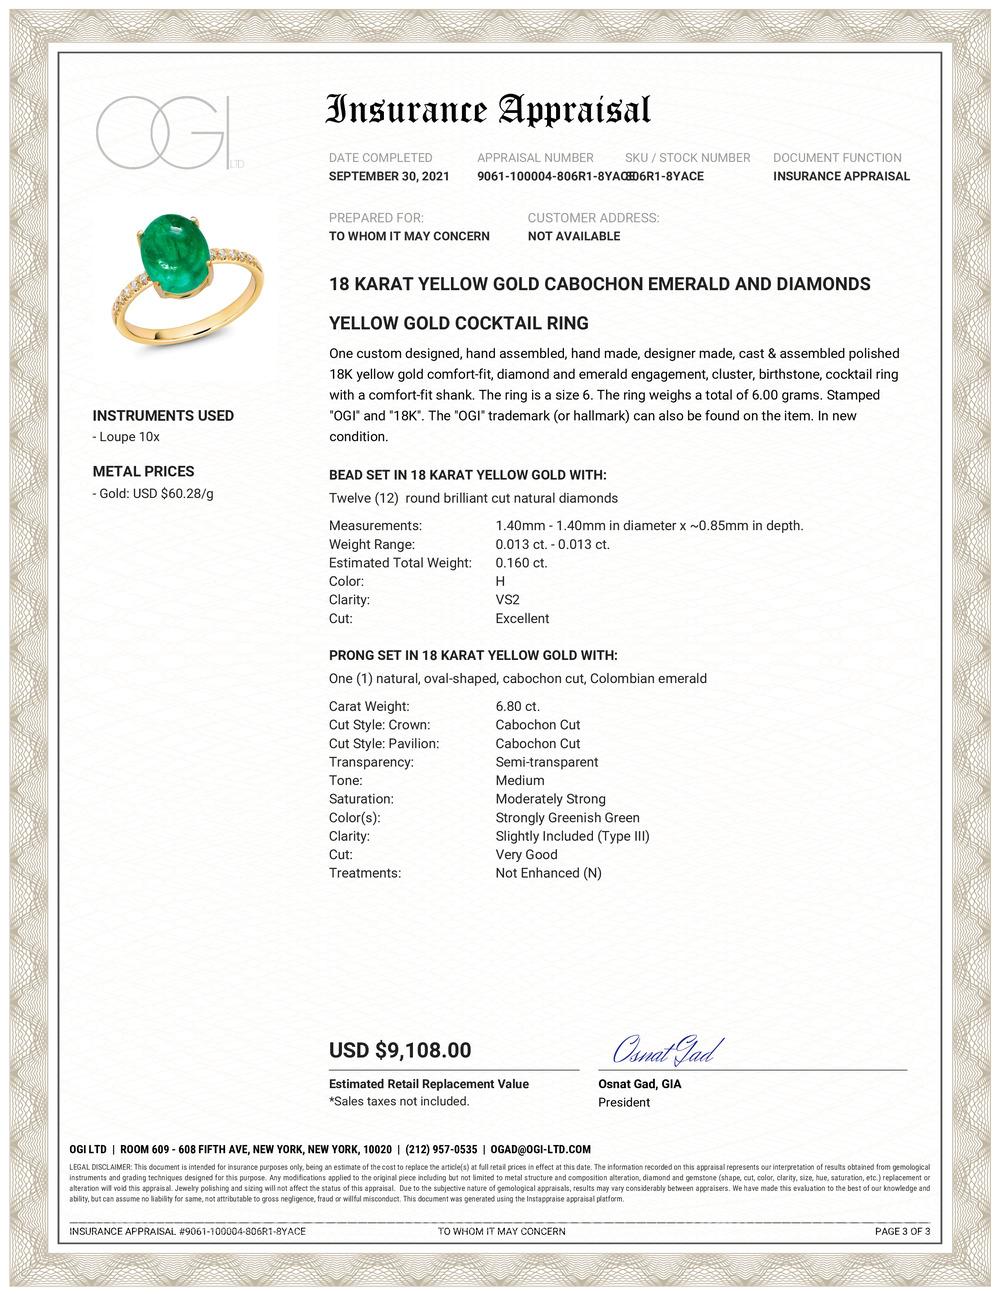 Eighteen Karats yellow gold emerald and diamond ring 
Cabochon emerald weighing 6.80 carat      
Diamonds weighing 0.16 carats 
Emerald hue tone color is grass green                                                     
Ring Size 6 In Stock
The ring